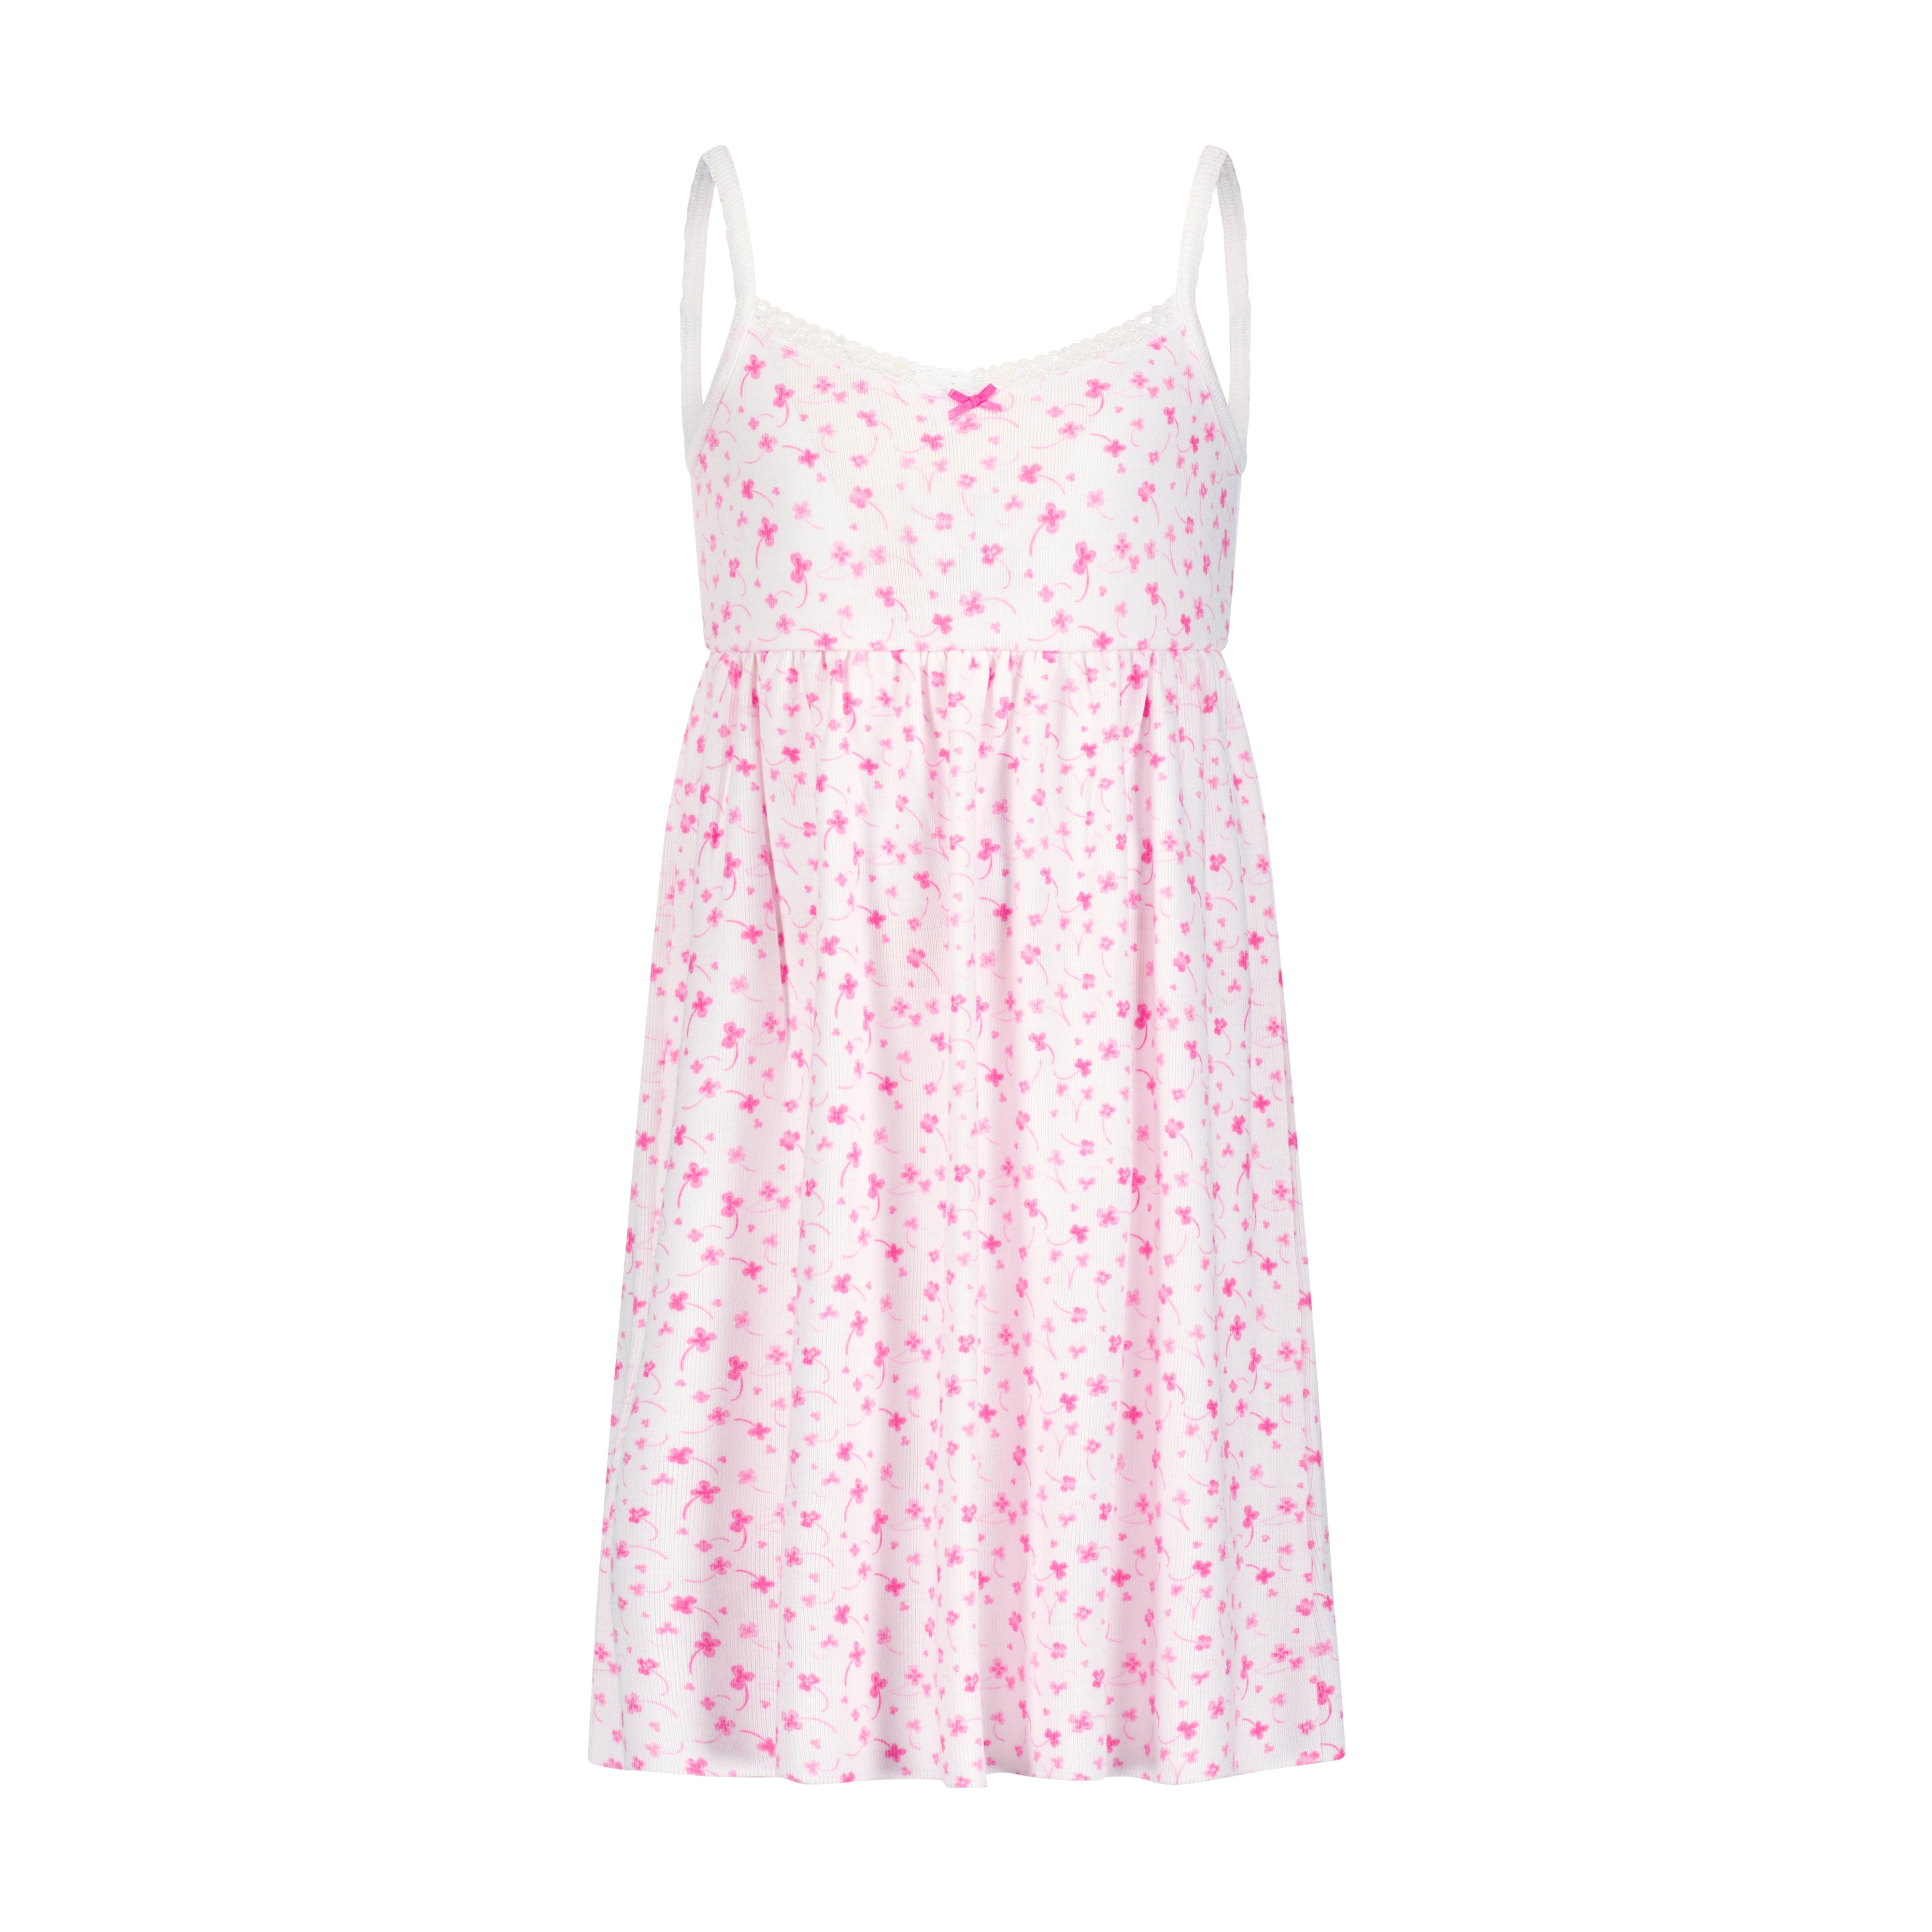 GIRLS PINK CLOVER Print BABYDOLL GOWN w Lace